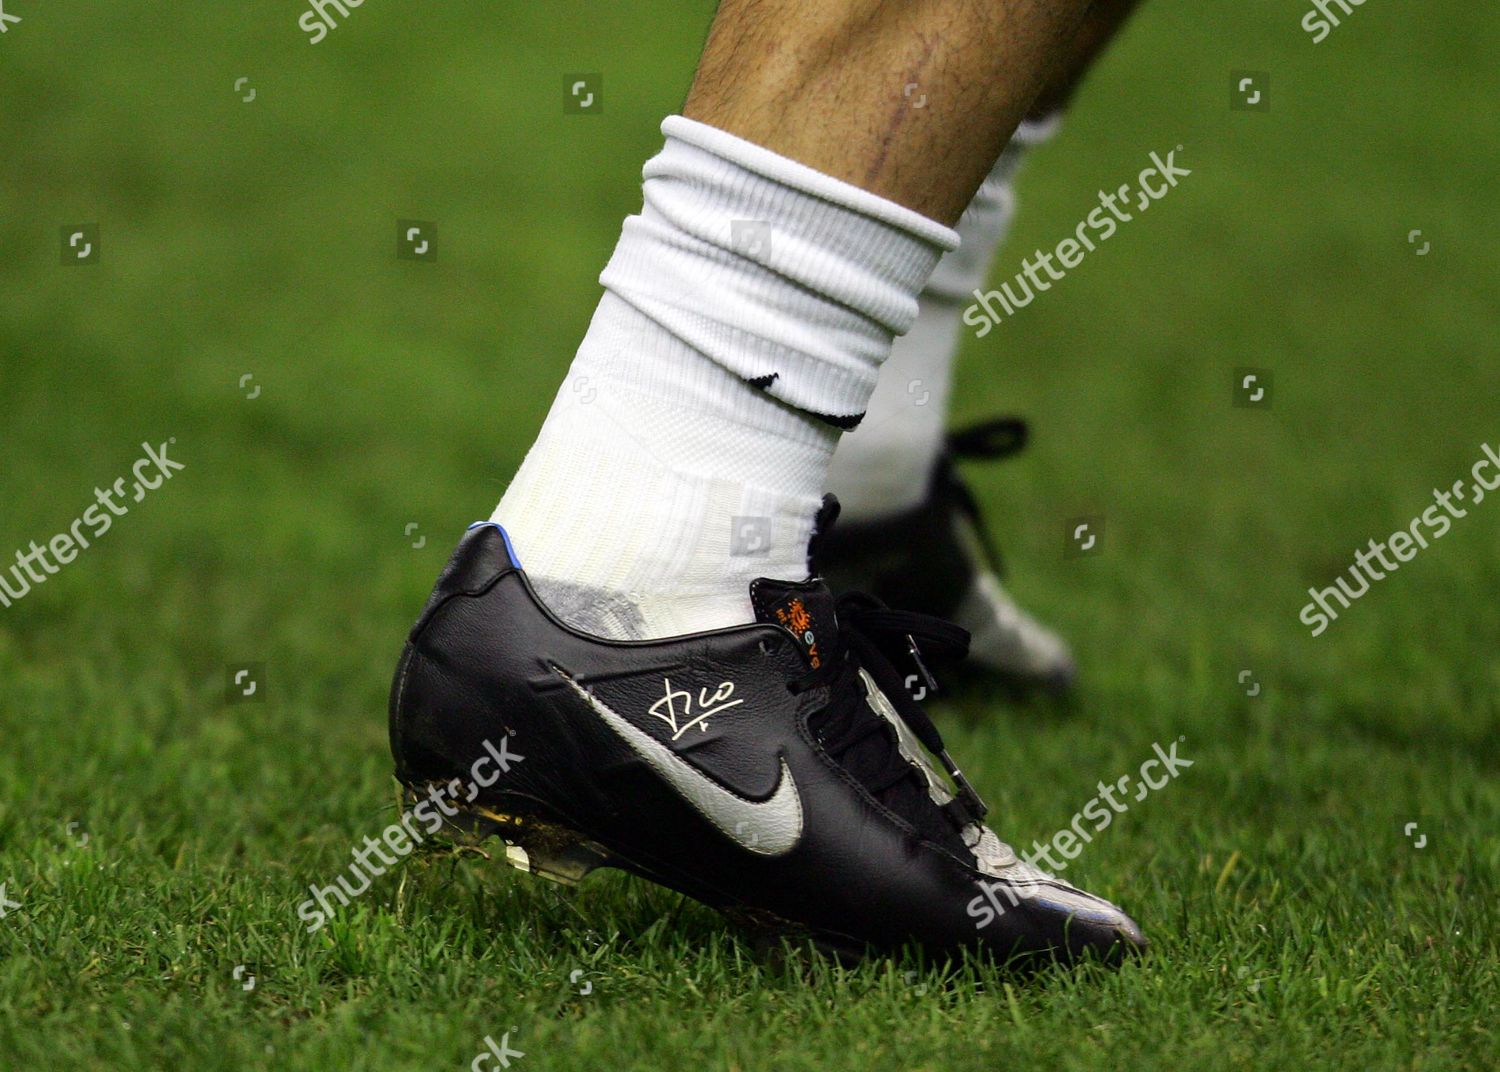 Imperial Obsesión Horror Personalized Nike Boots Luis Figo Inter Editorial Stock Photo - Stock Image  | Shutterstock